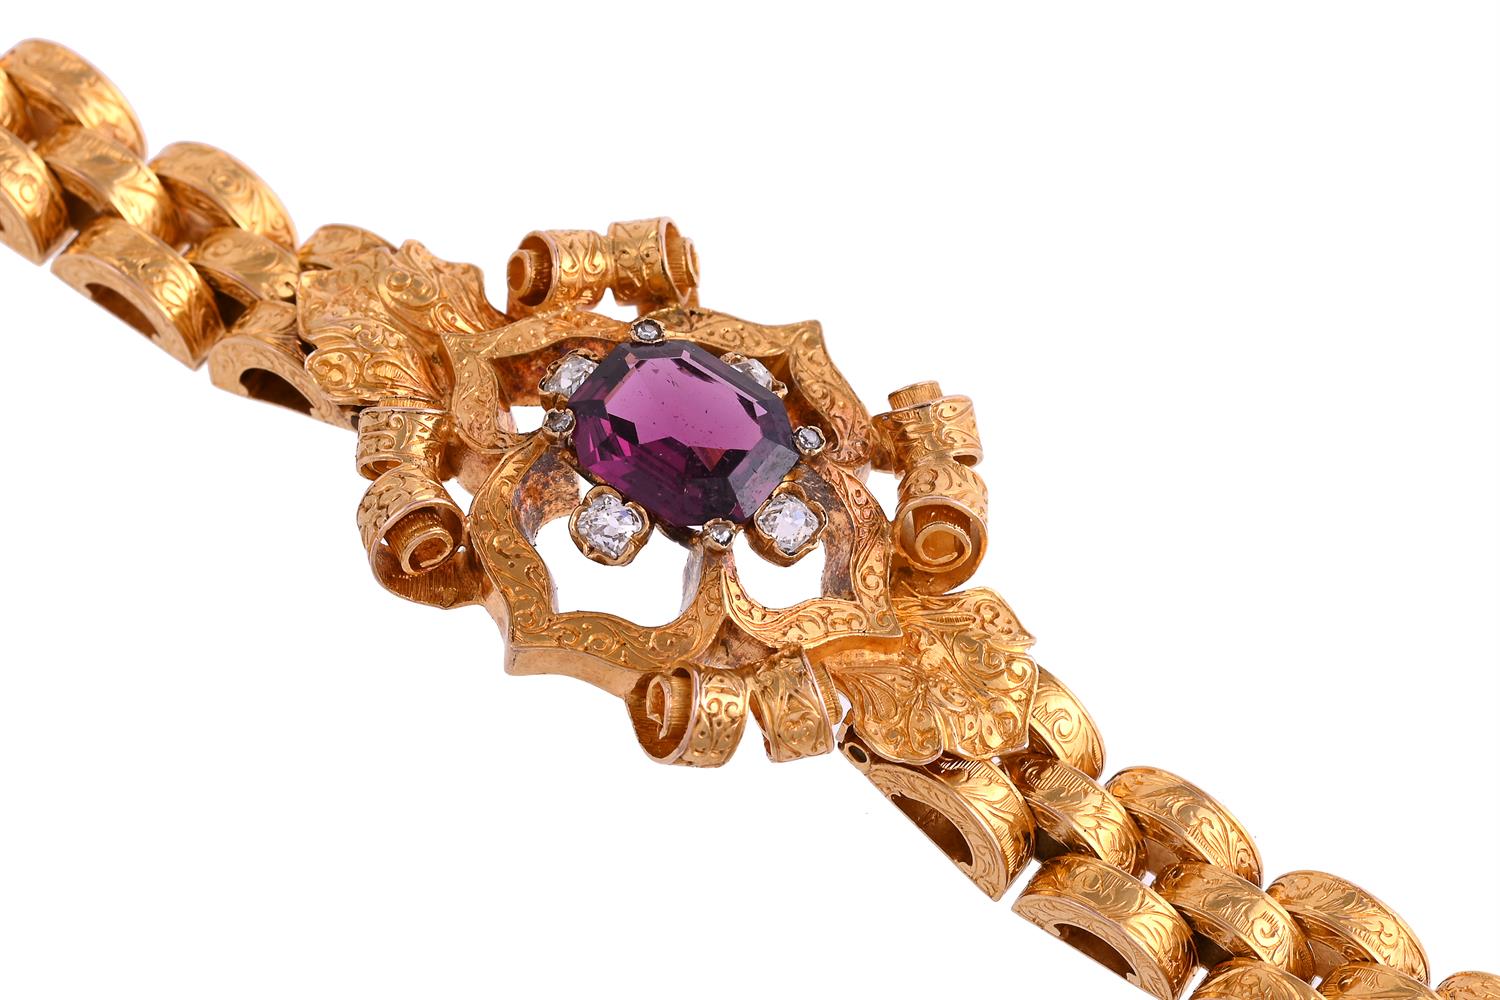 A FRENCH MID 19TH CENTURY GOLD, GARNET AND DIAMOND BRACELET, CIRCA 1860 - Image 2 of 4